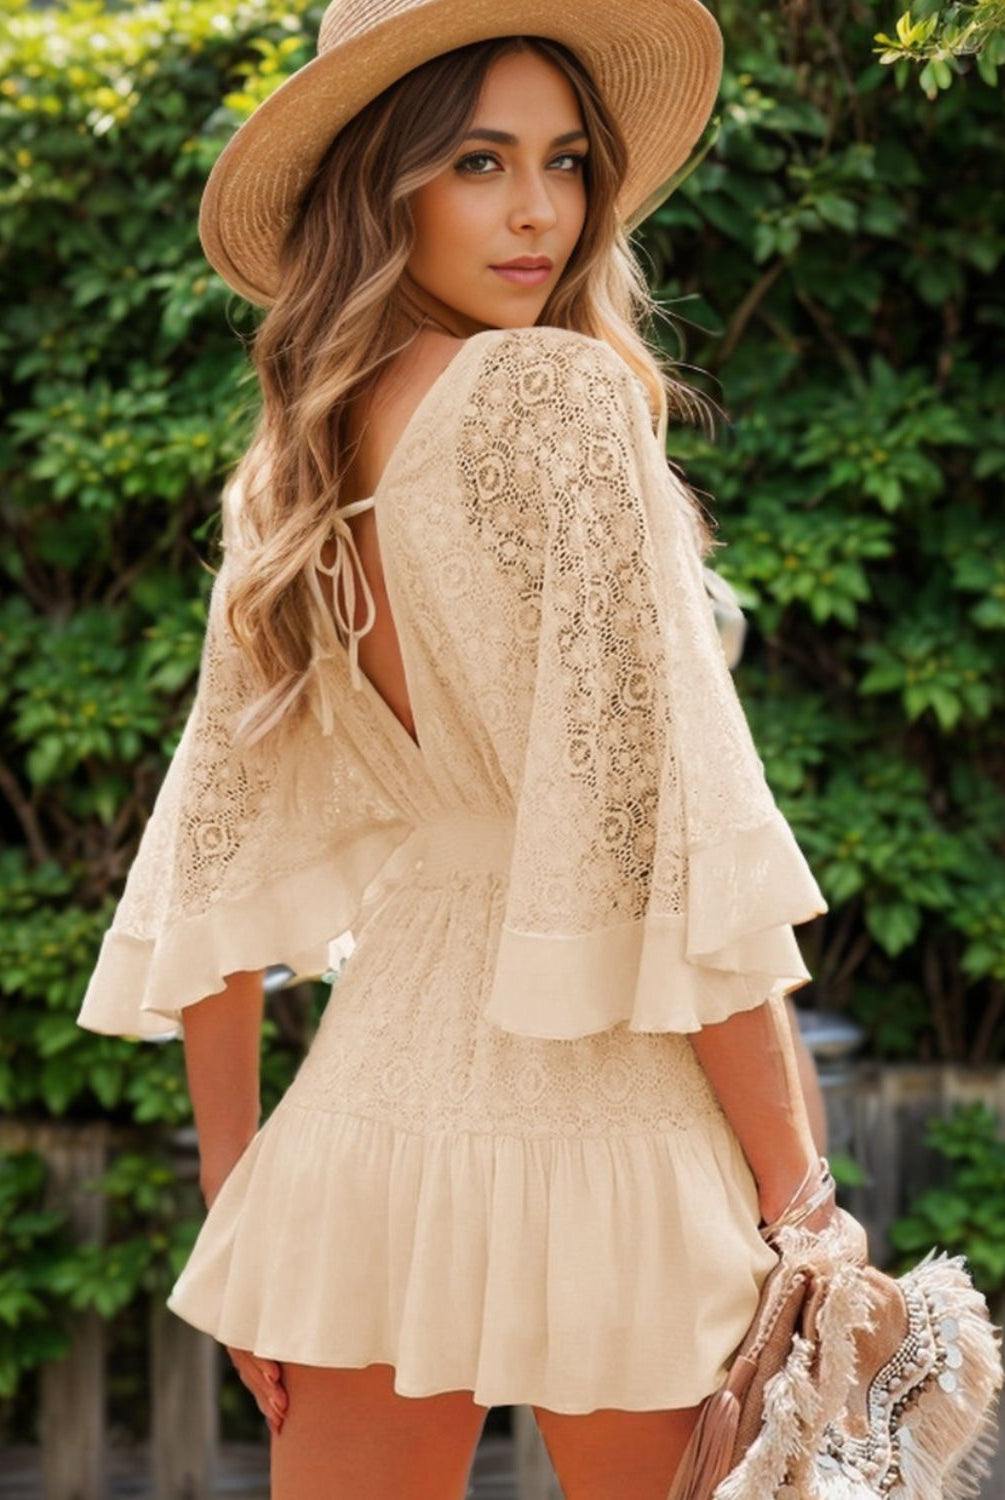 Fashionable woman posing in a cream lace-back mini dress with ruffle details